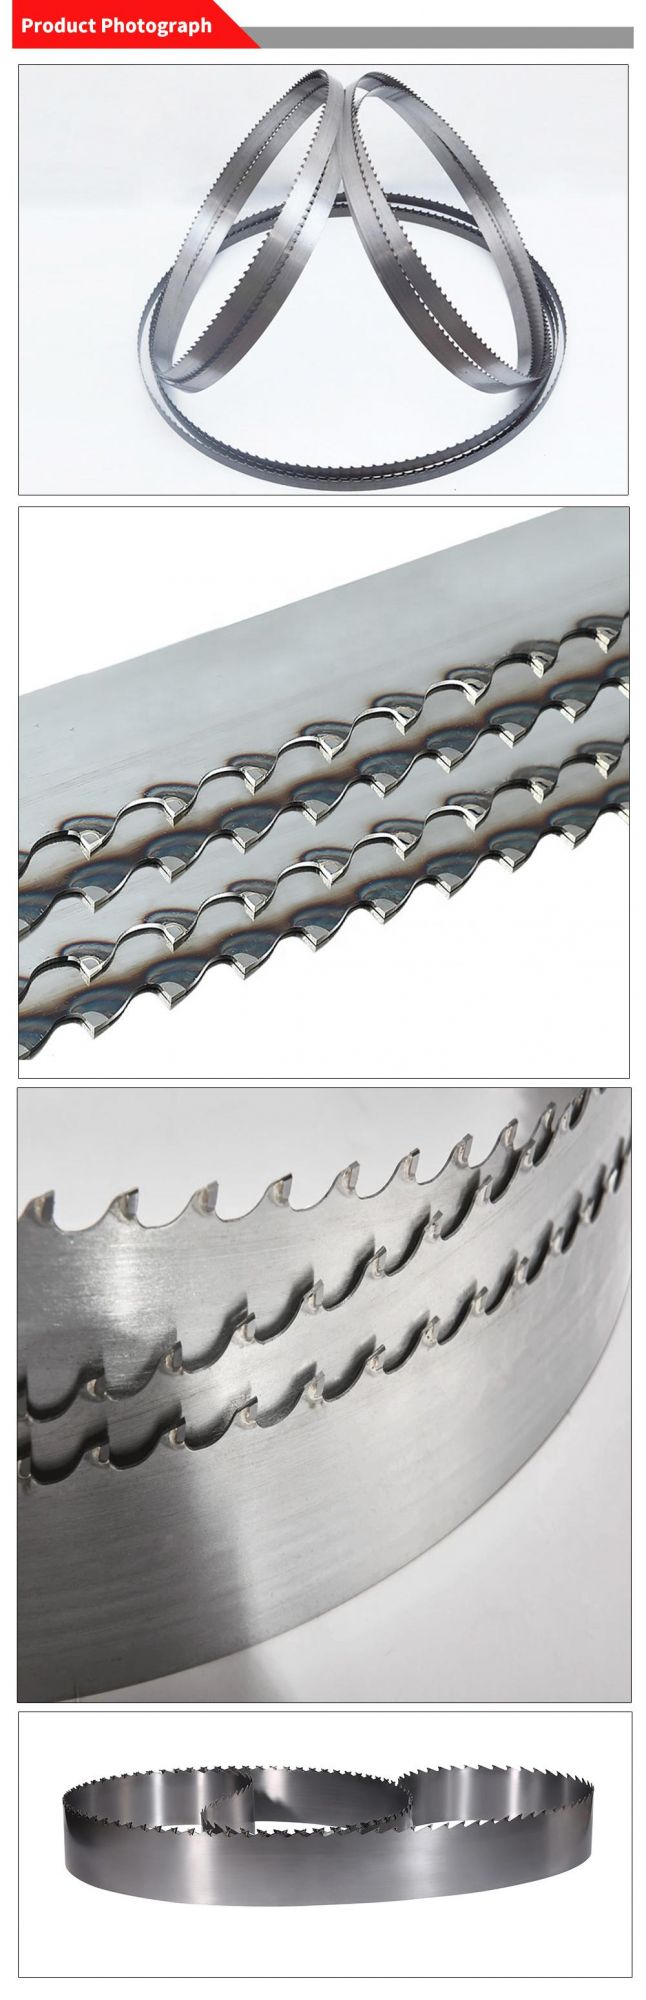 Pilihu Woodworking Carbide Tipped Band Saw Blade for Wood Cutting